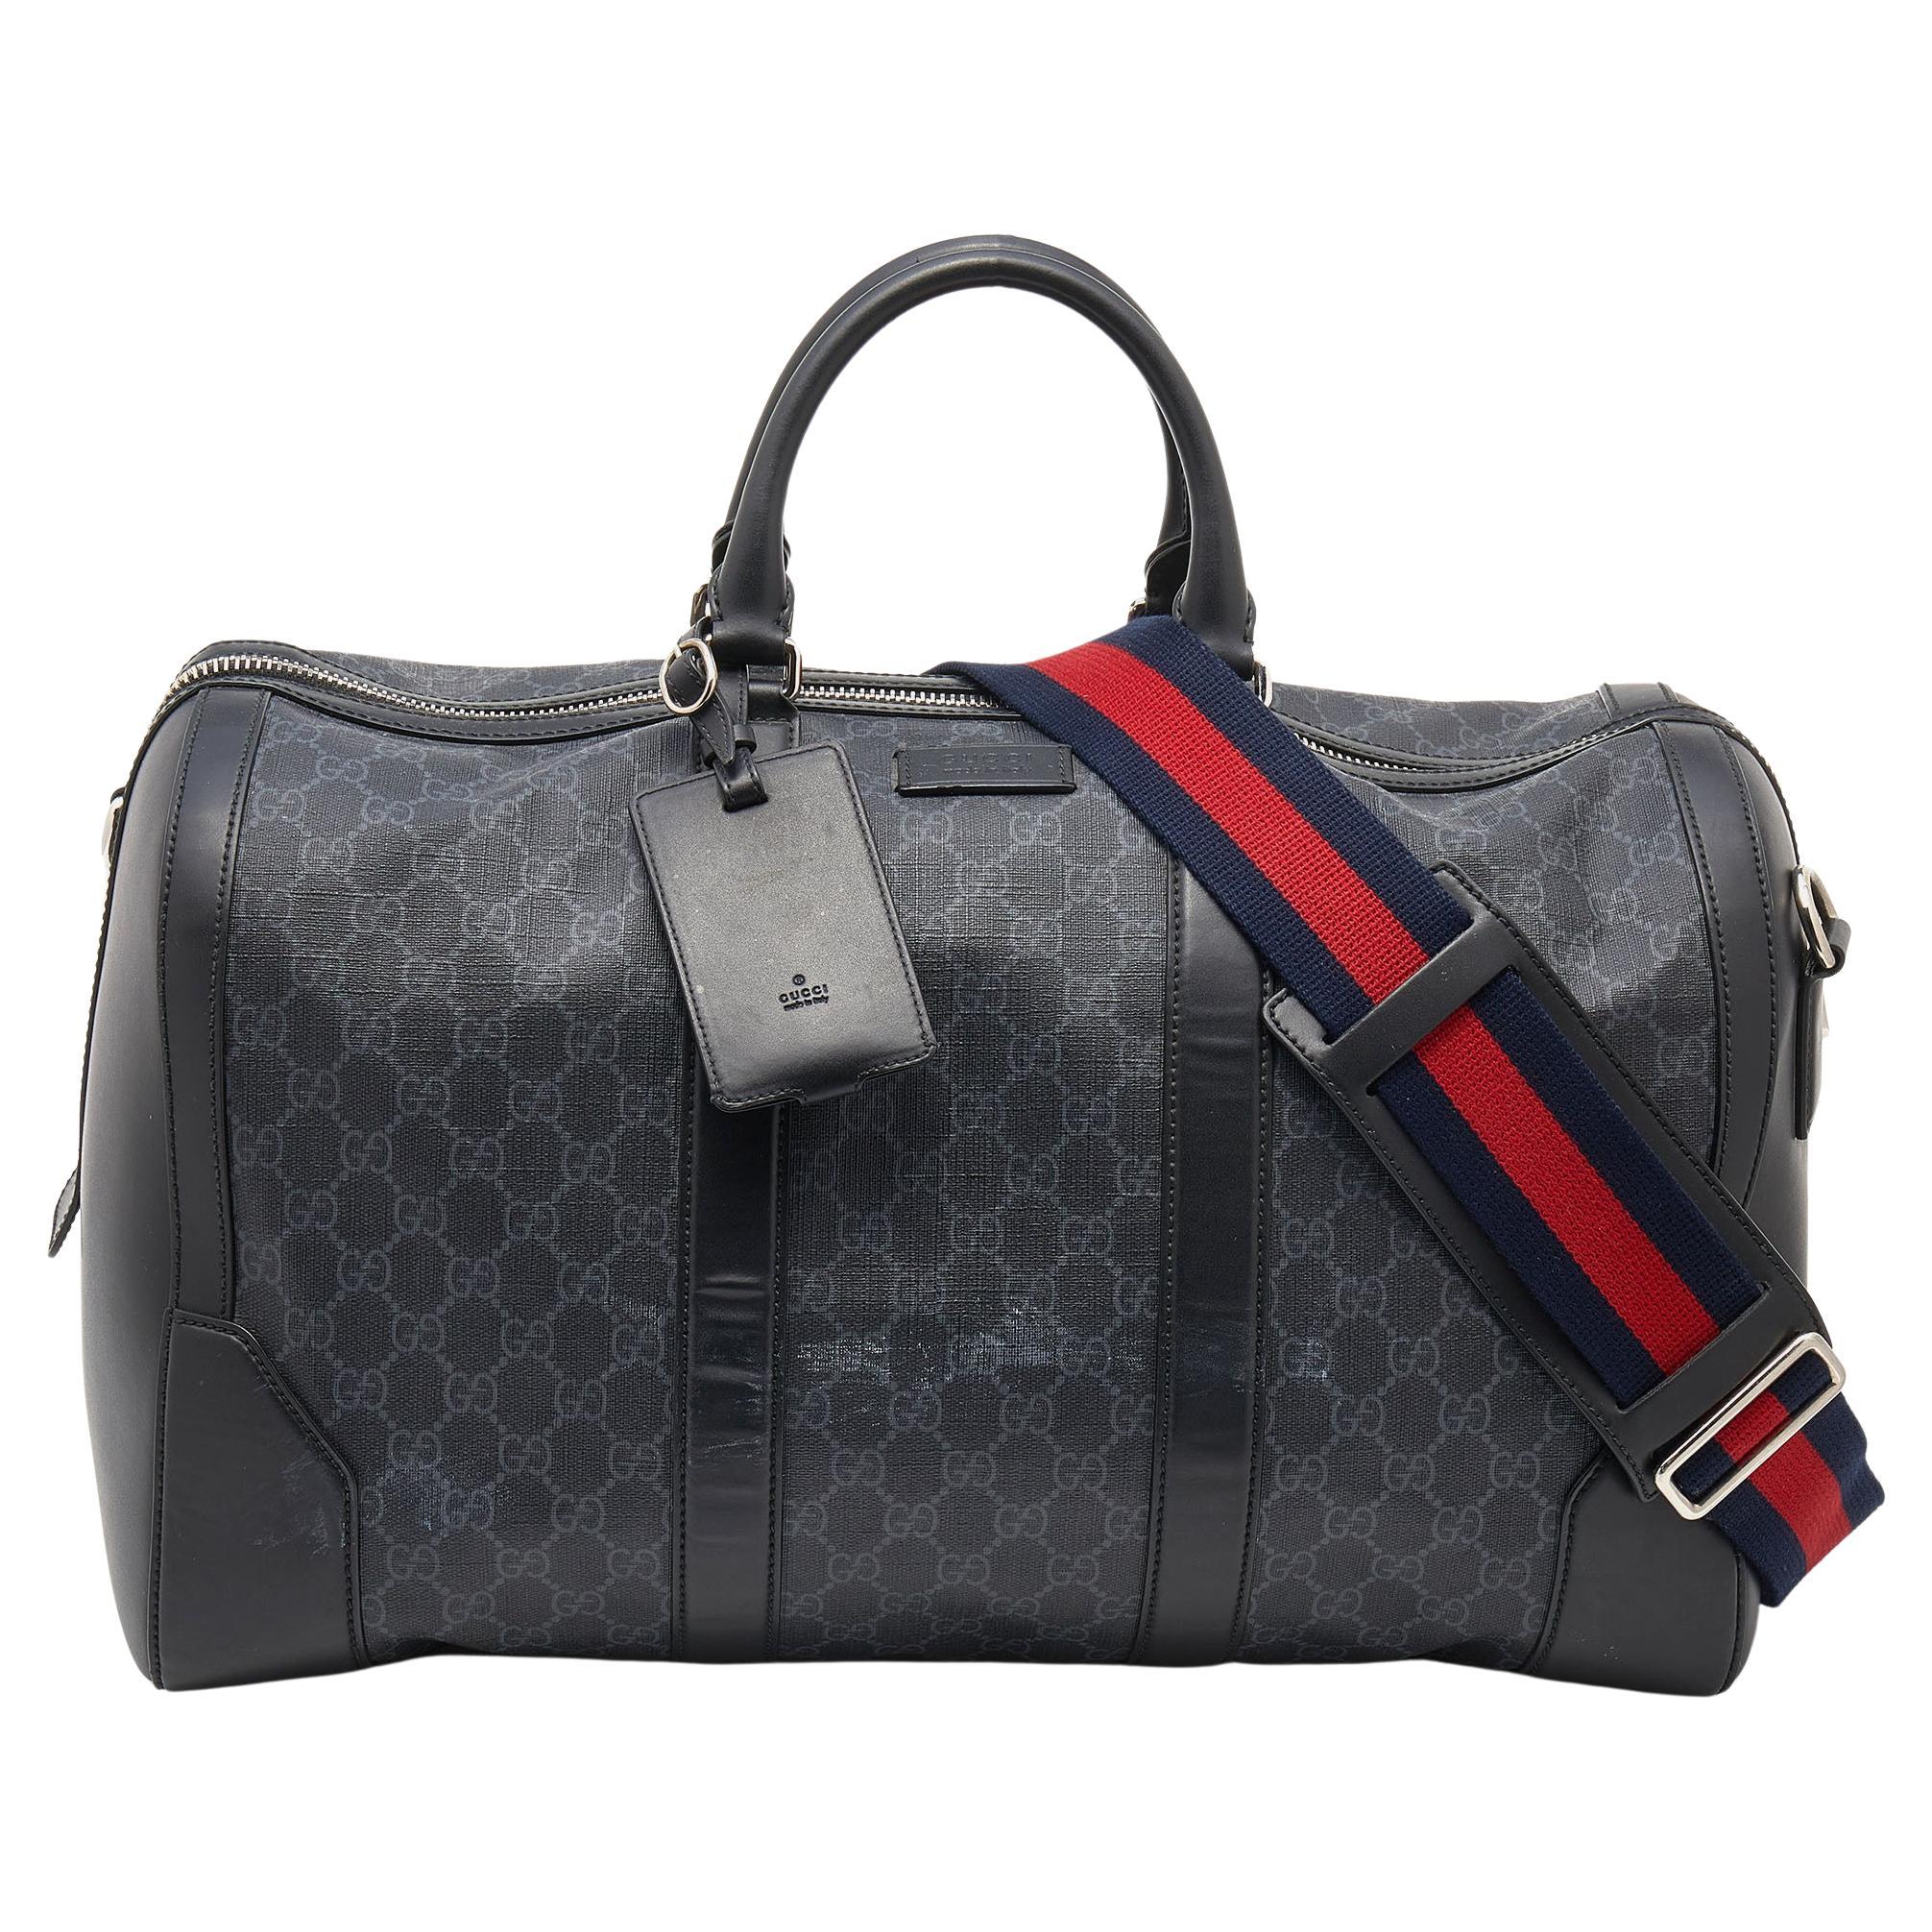 Gucci Black GG Supreme Canvas and Leather Medium Carry On Duffle Bag